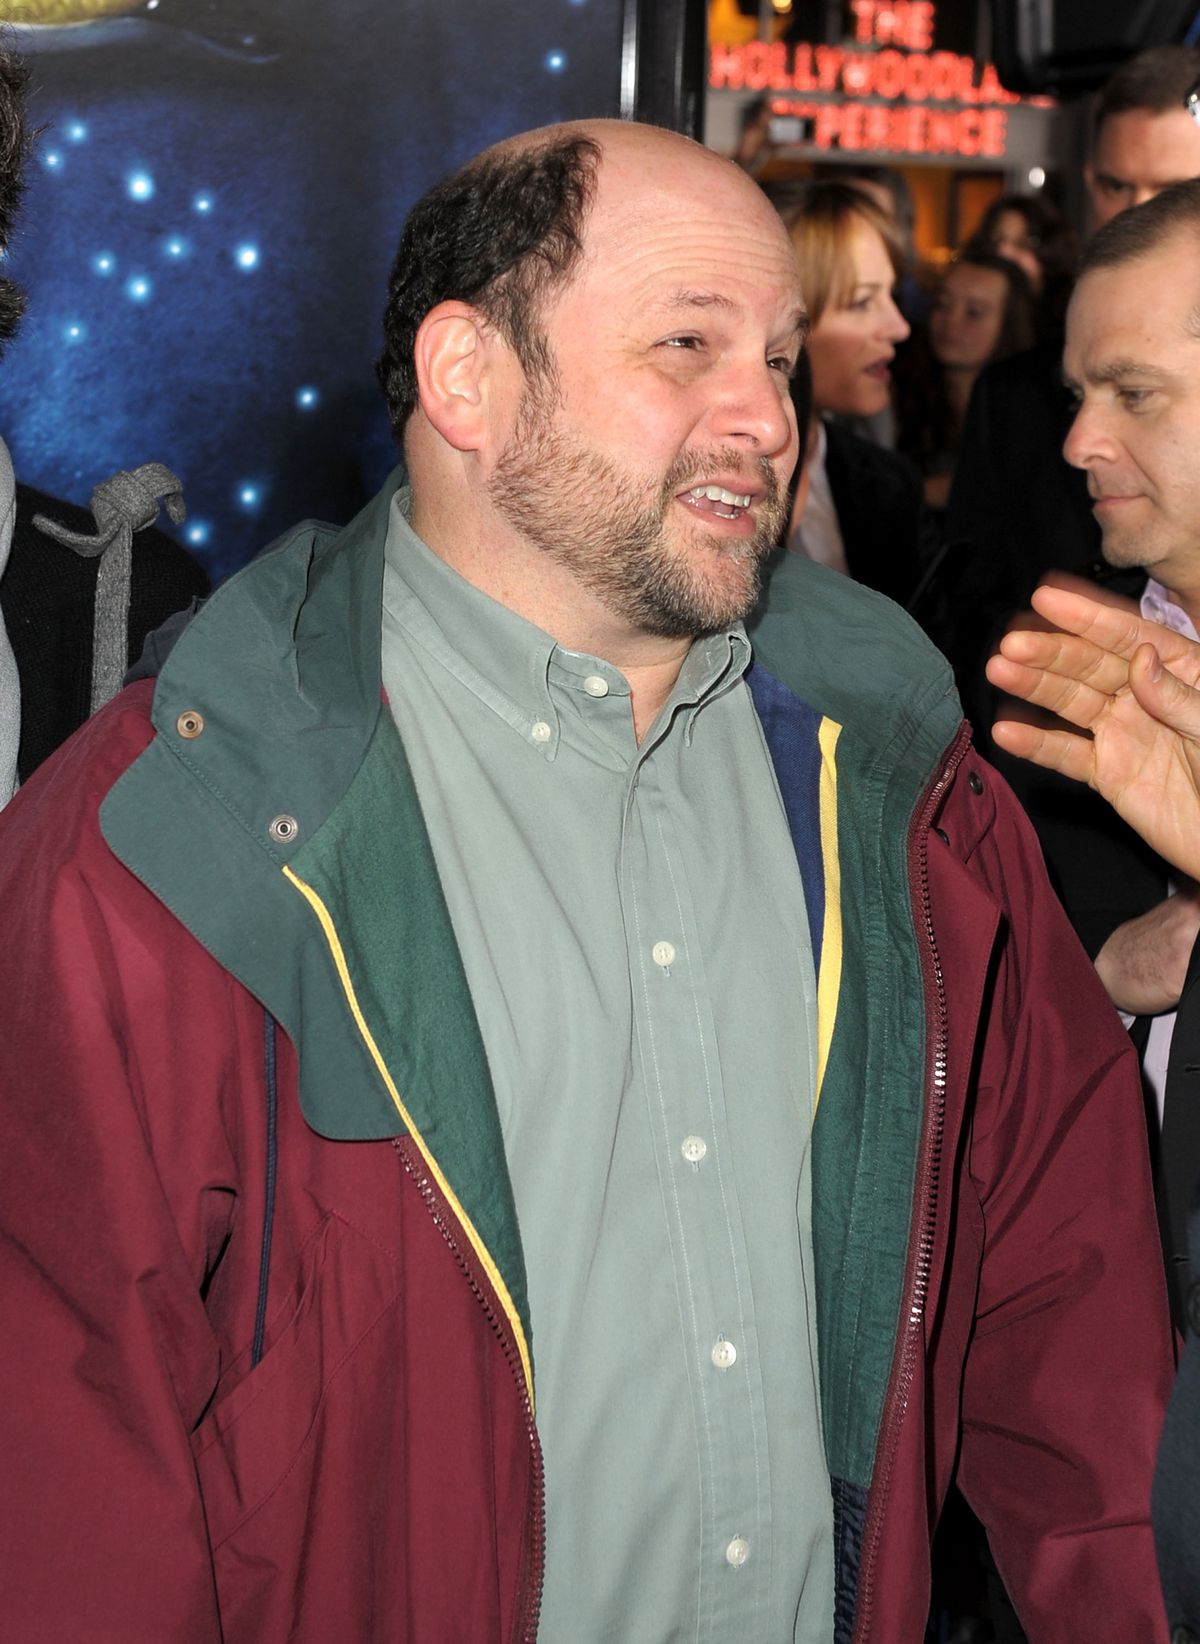 Jason Alexander wearing a red and green windbreaker at the Avatar premiere